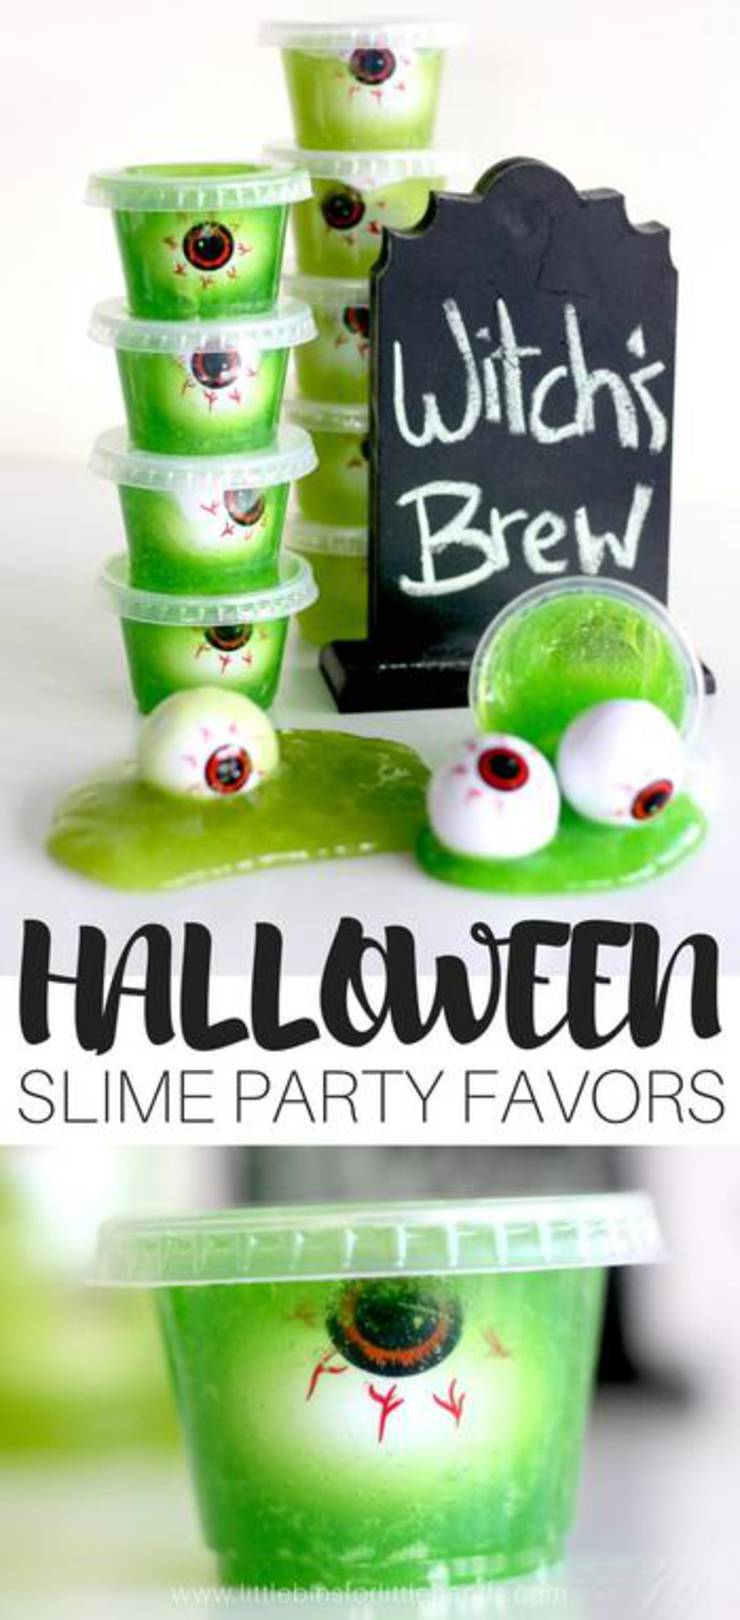 Halloween Candy Free Slime Party Favors For Kids